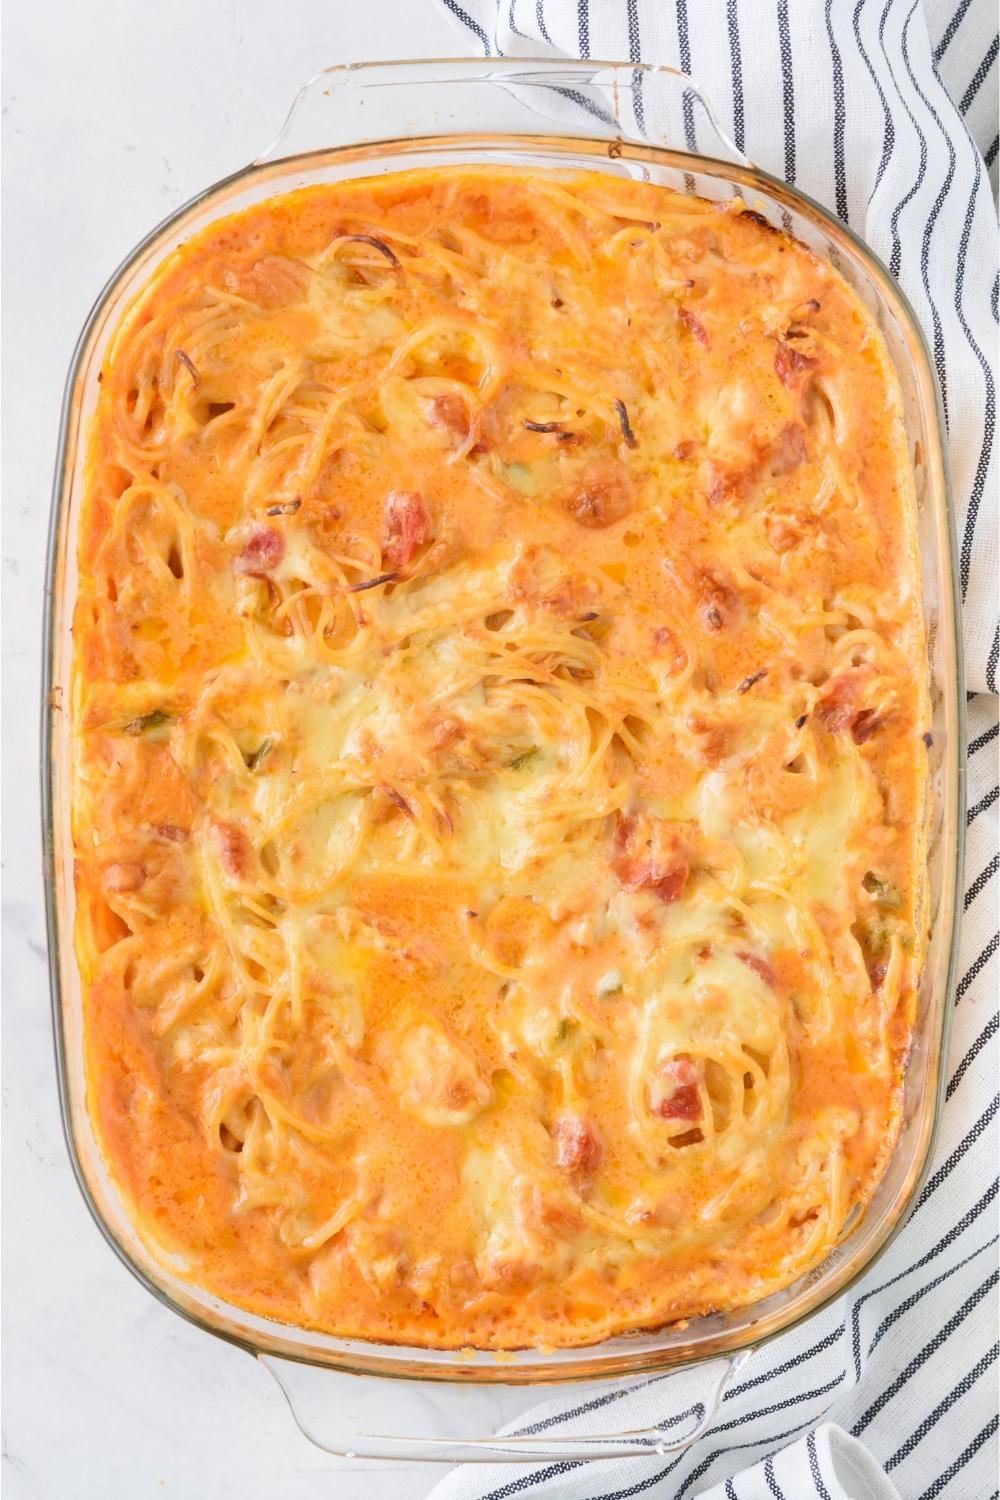 A casserole dish with baked rotel chicken spaghetti casserole in it.